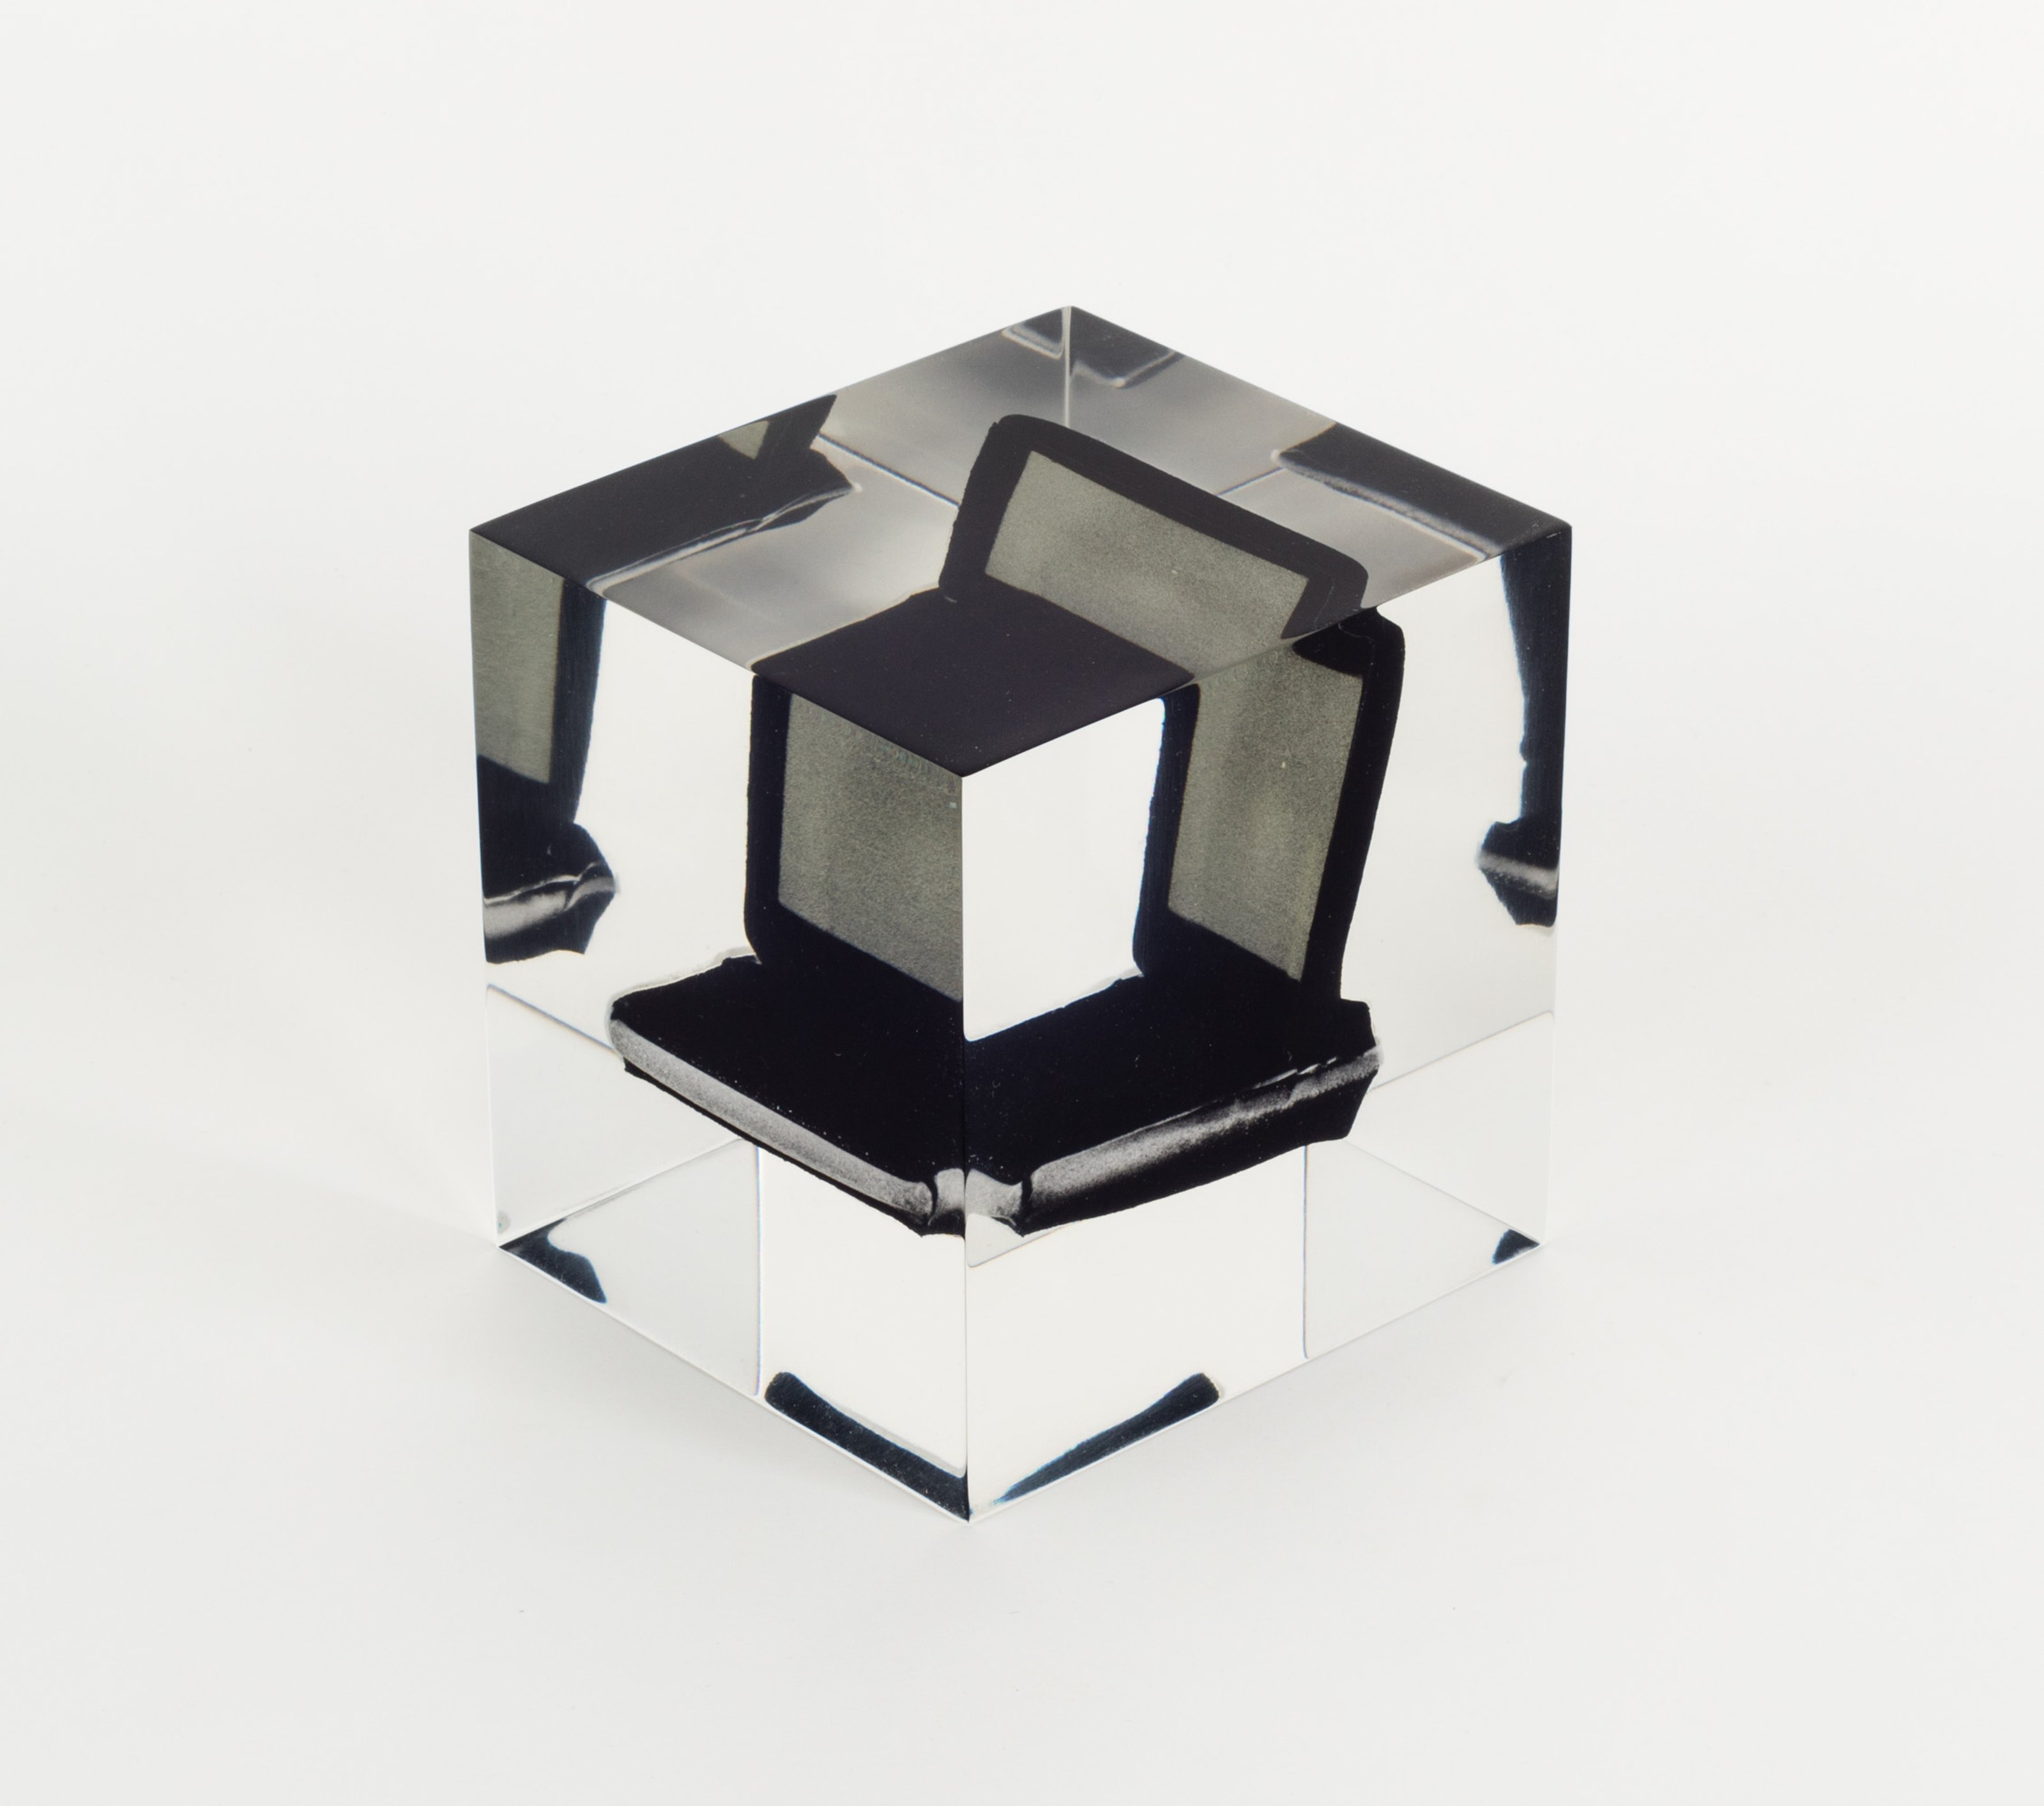 Stress toy shaped as a laptop, embalmed in clear, cubic Lucite (a type of acrylic resin)